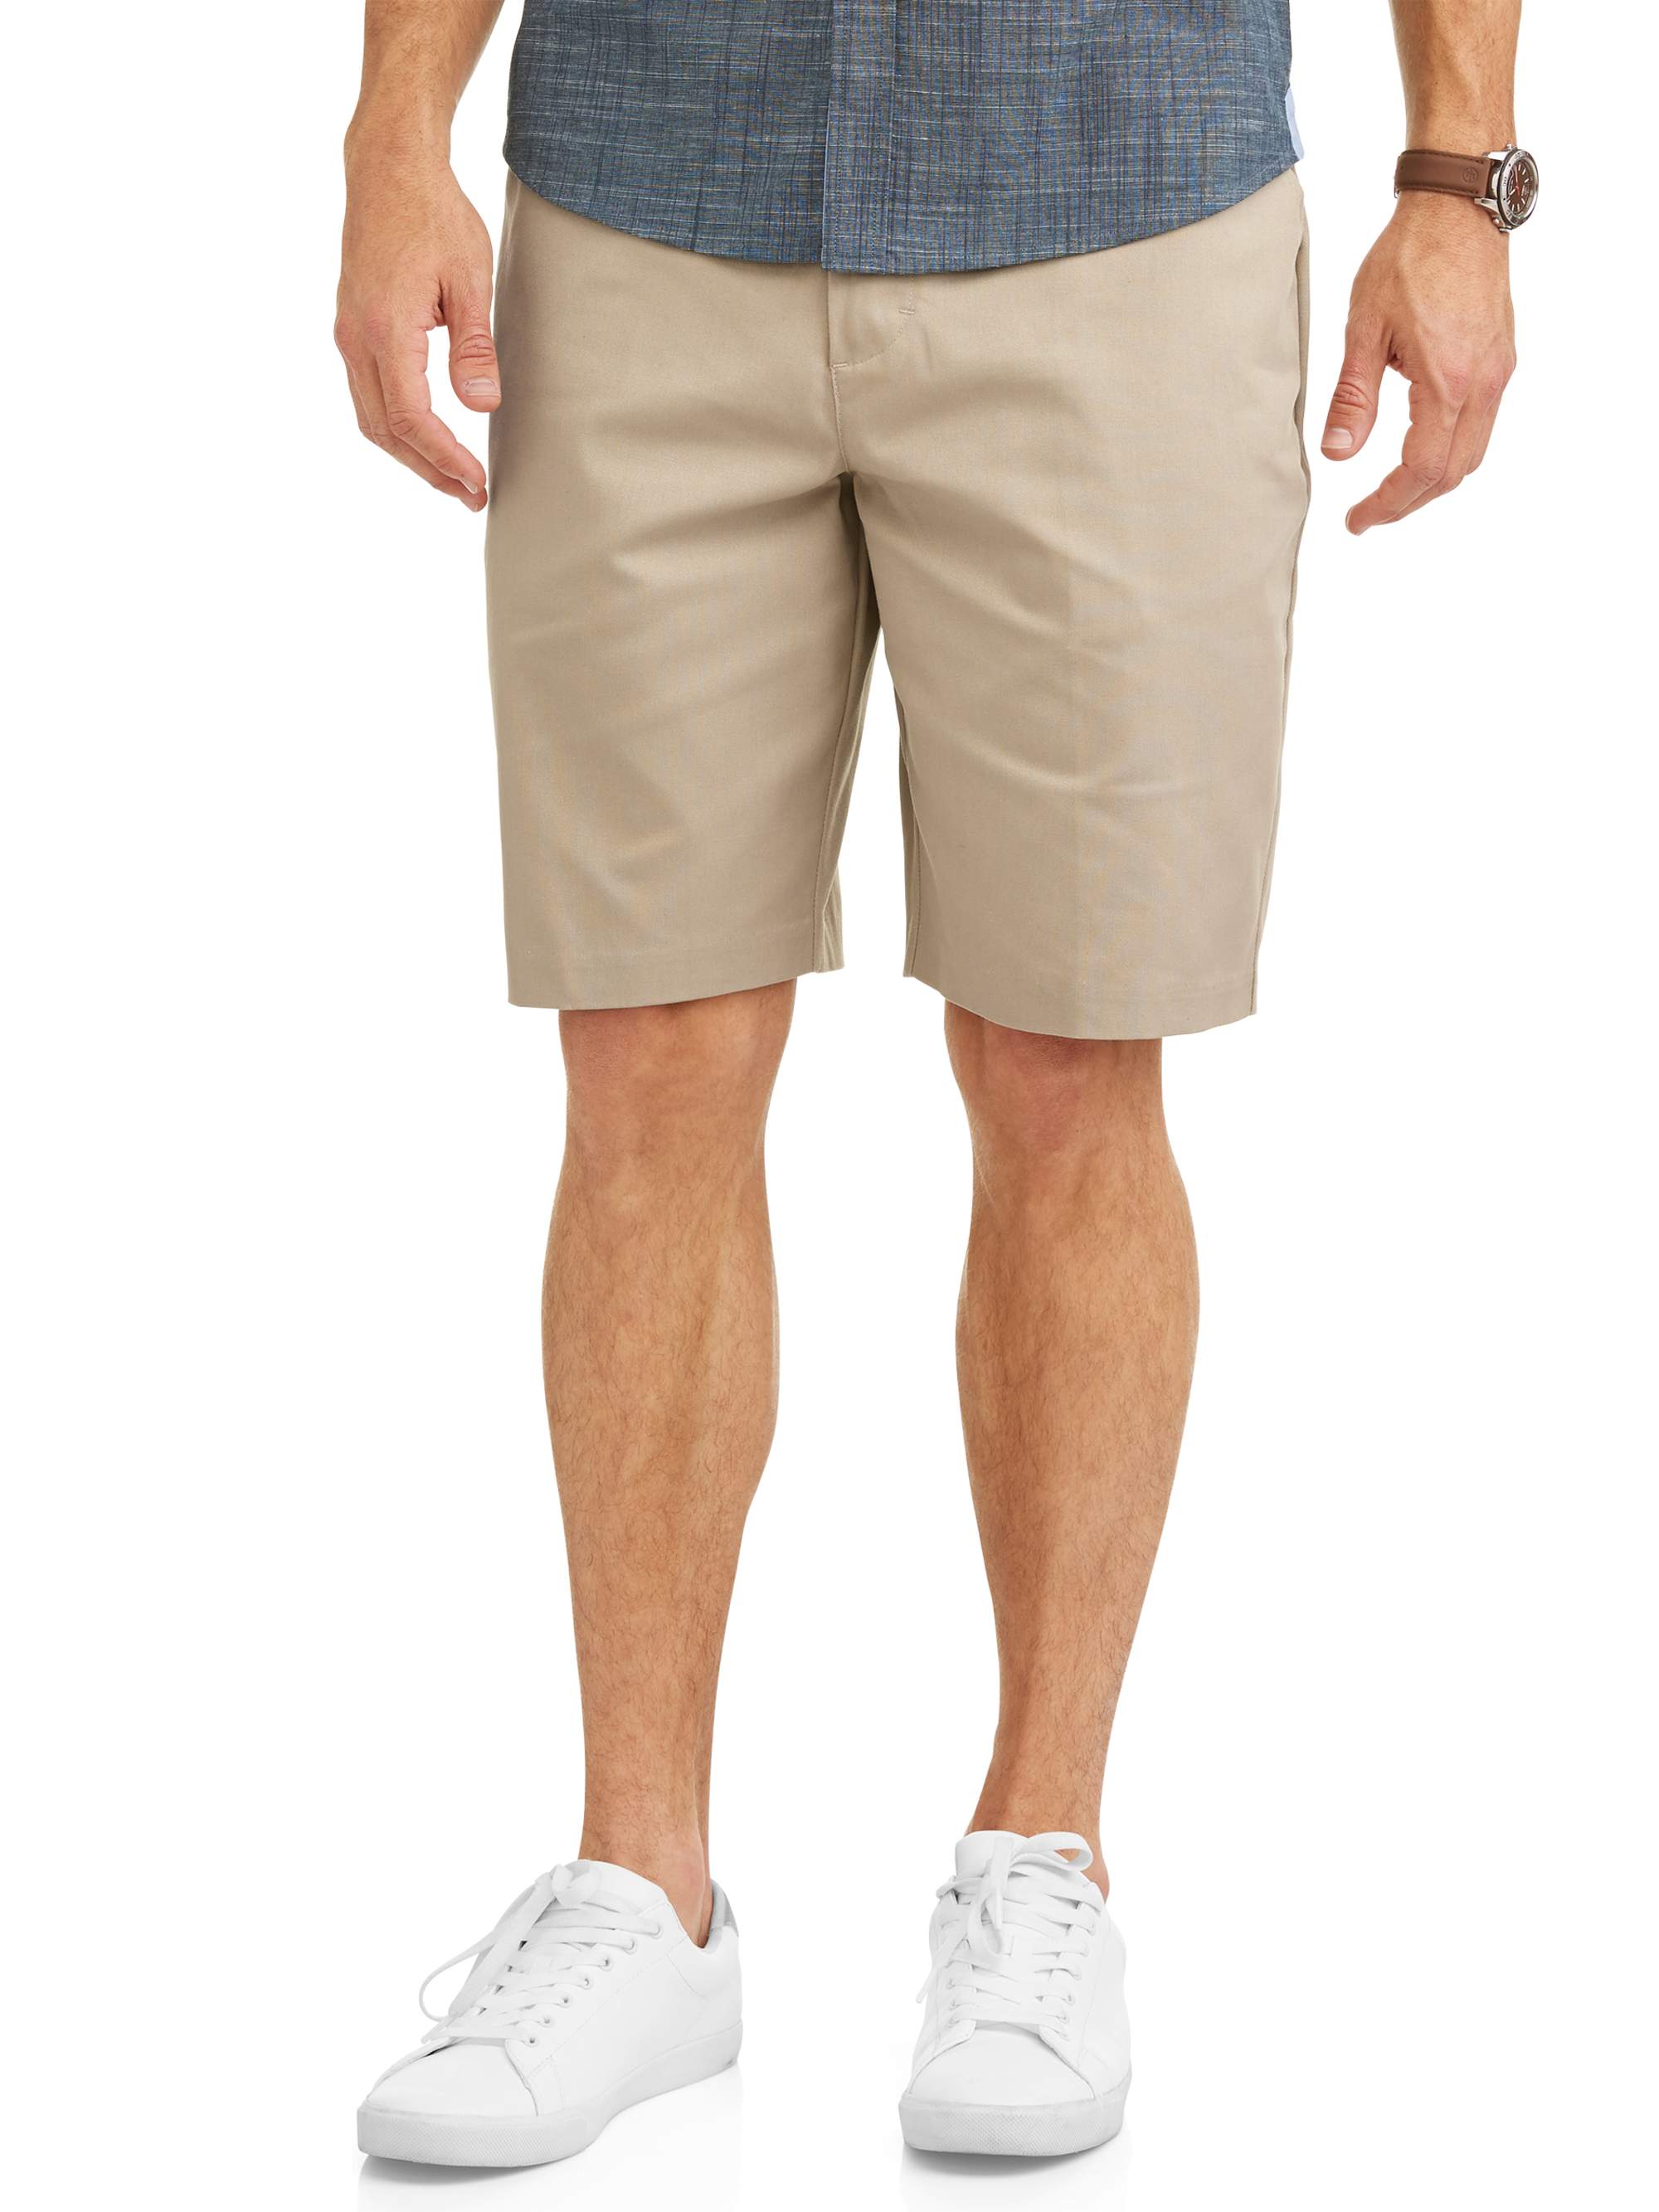 Real School Young Men's 10" Flat Front Short - image 1 of 4